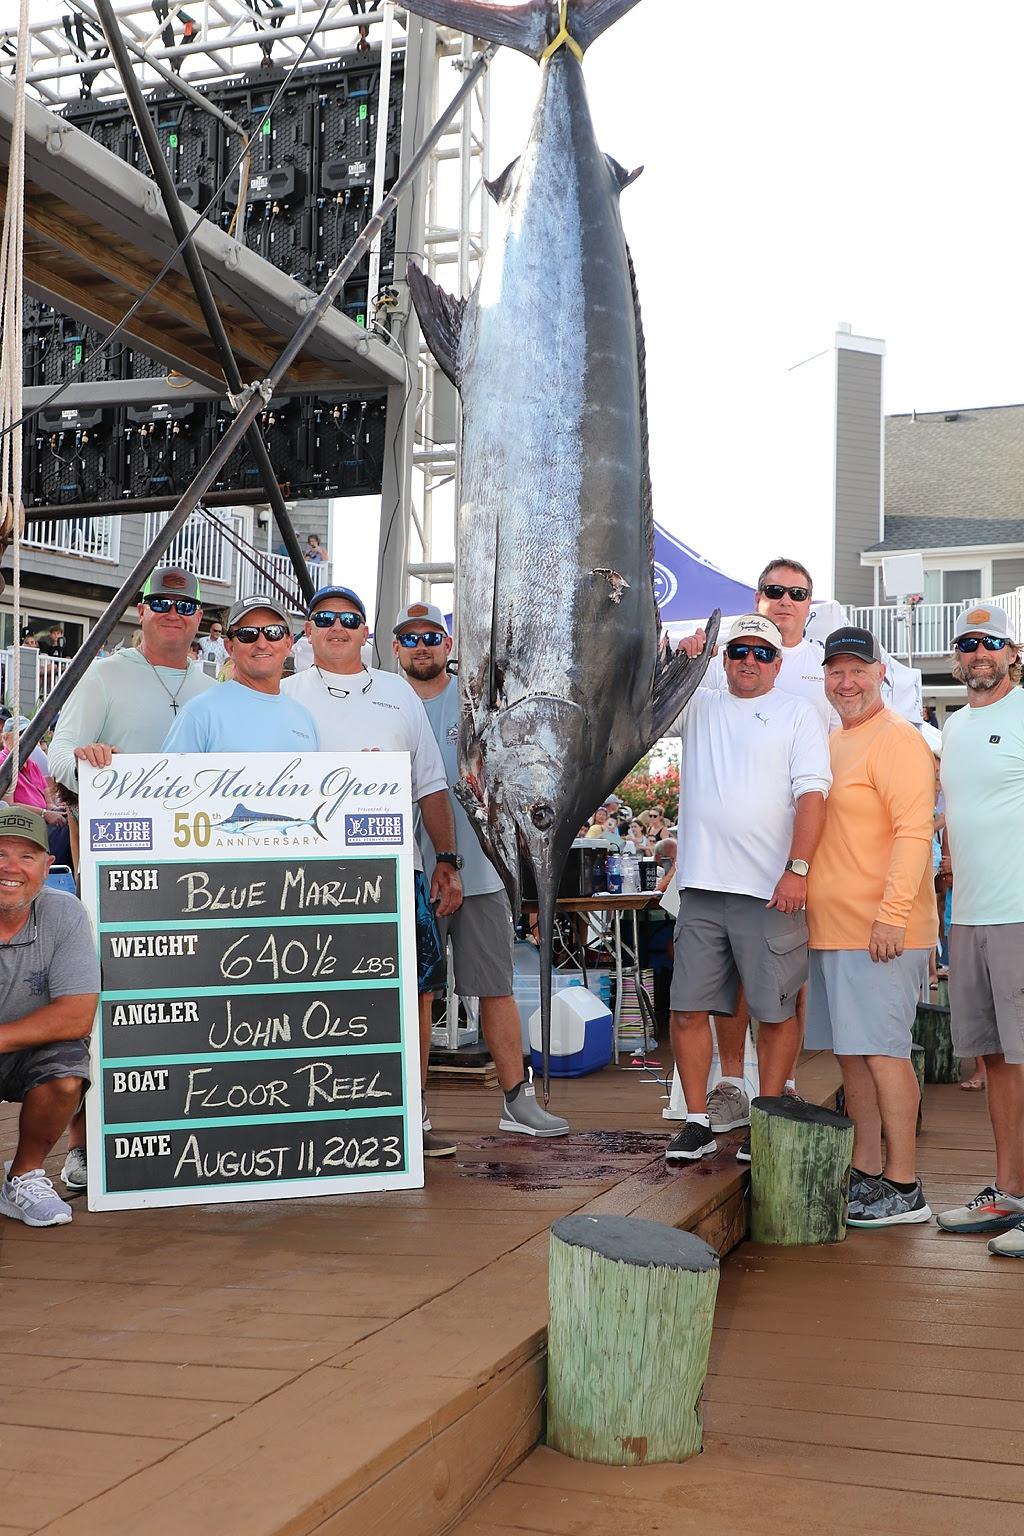 John Ols, a Laytonsville, Maryland, resident fishing on Floor Reel reeled in a 640.5-pound blue marlin to claim the most lucrative category - and an estimated $6.2 million - as the tournament concluded in Ocean City late Friday night.